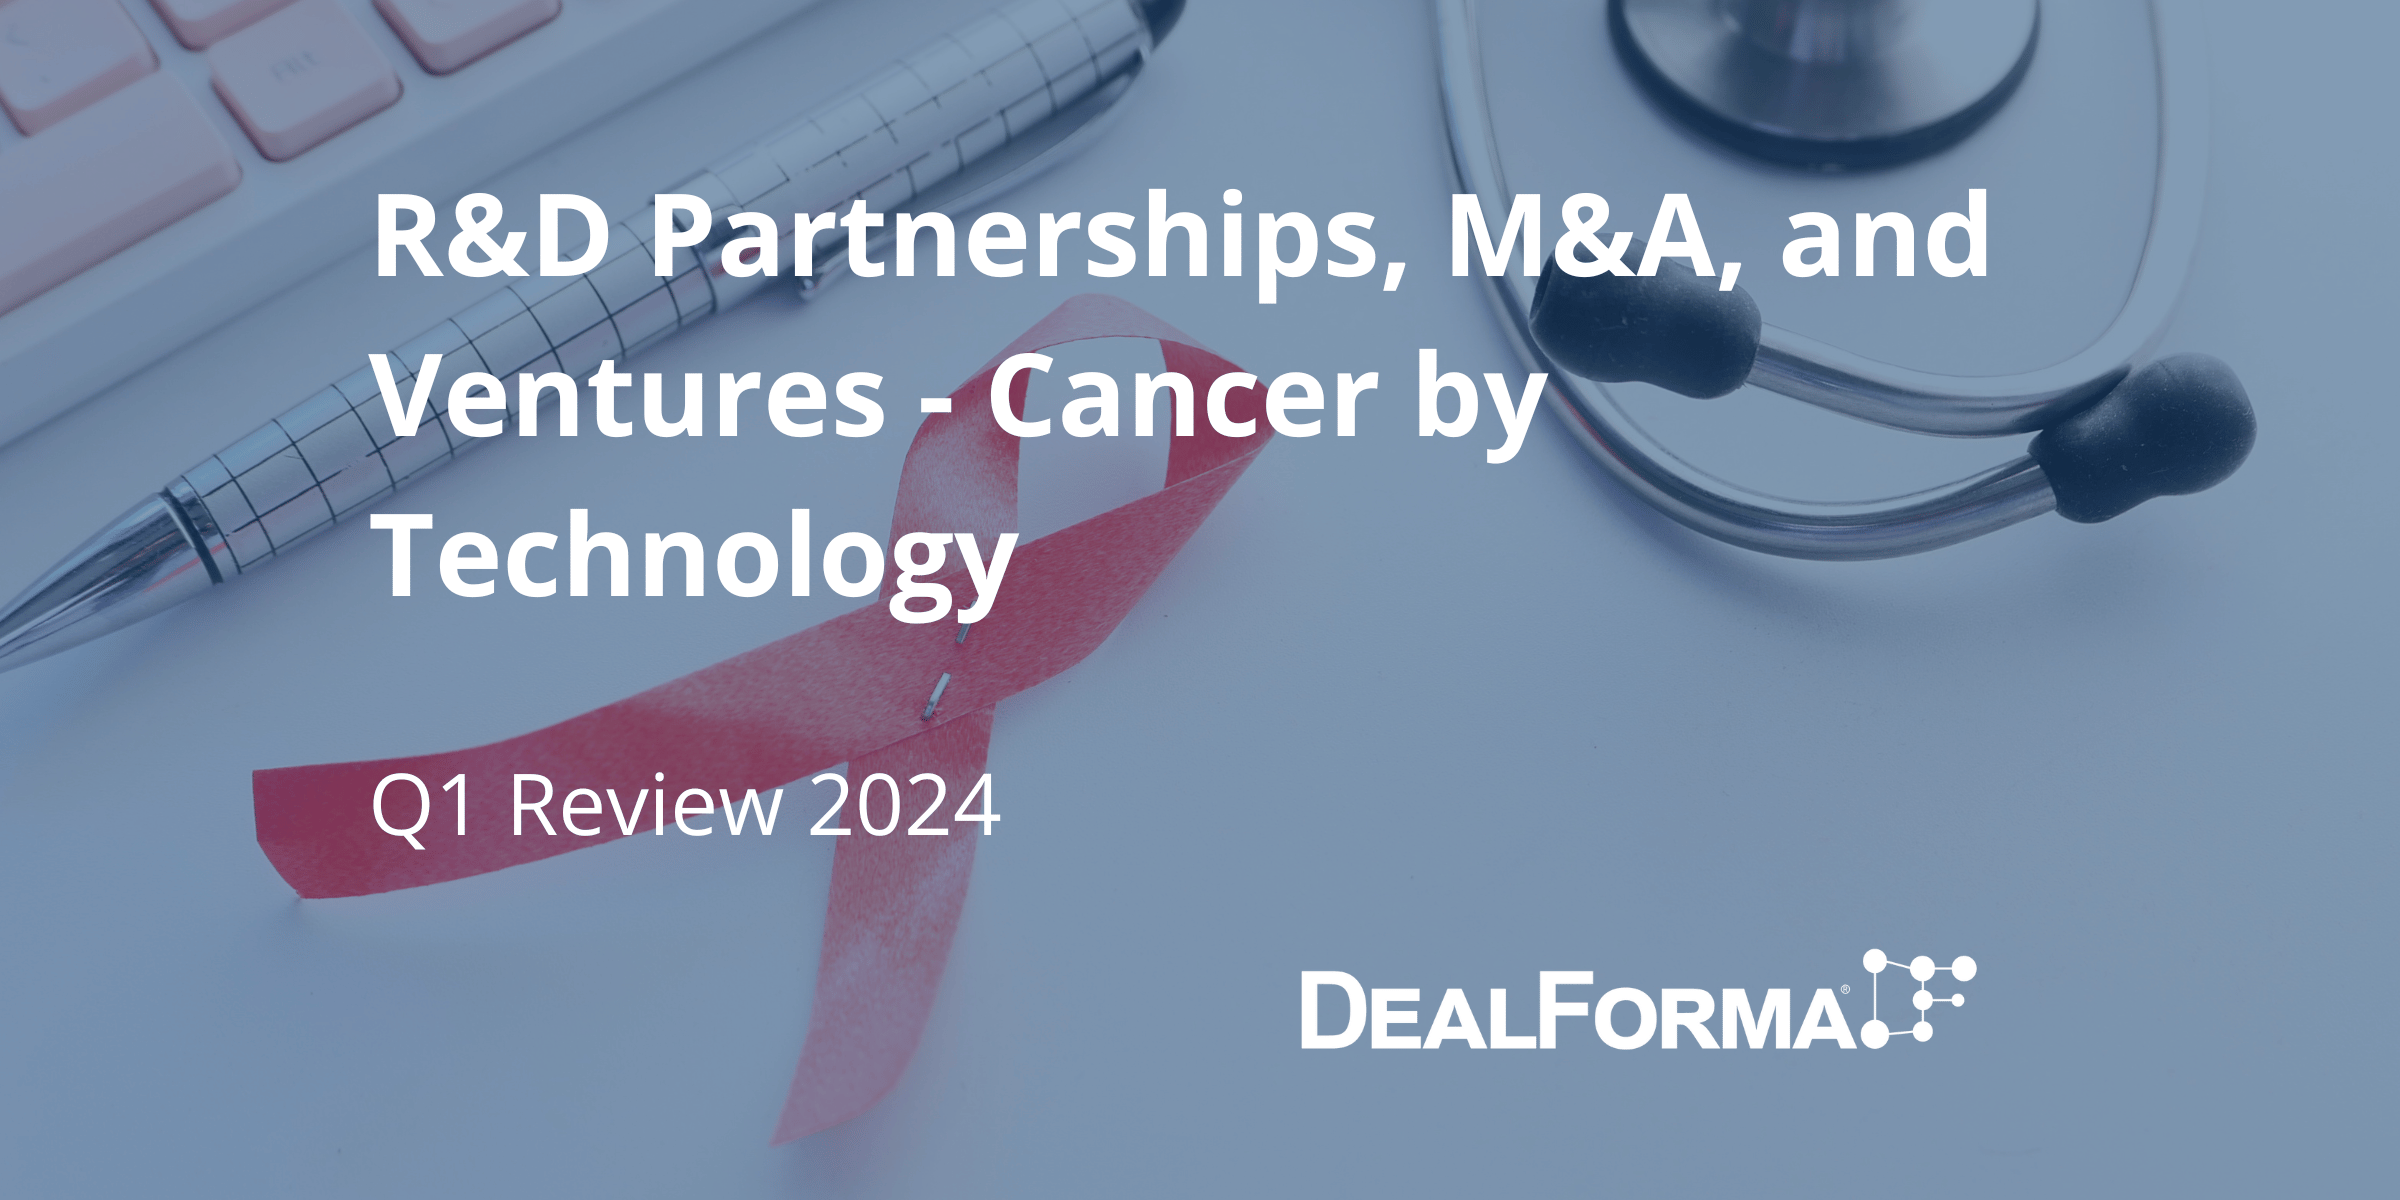 R&D Partnerships, M&A, and Ventures - Cancer by Technology - Q1 Review 2024